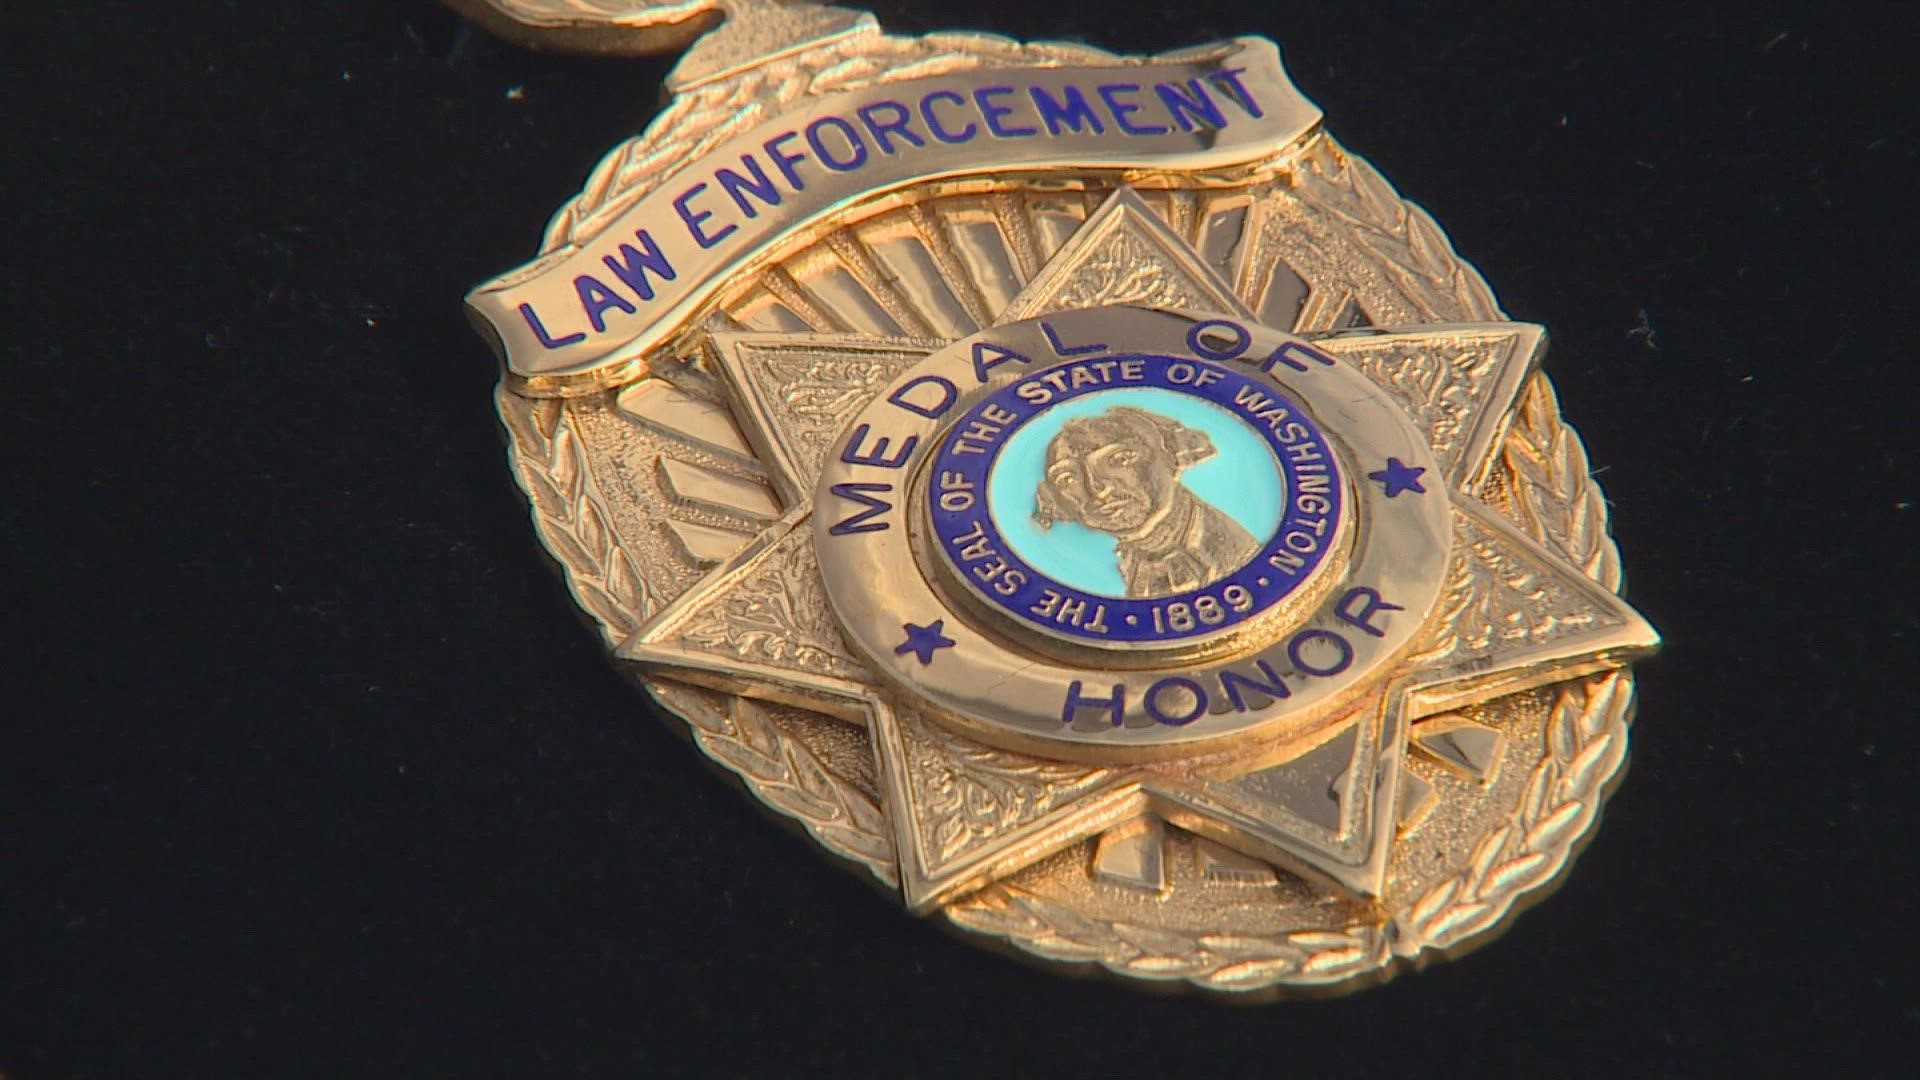 Several officers who died in the line of duty were awarded the medals posthumously. Other officers were recognized for acts of heroism.